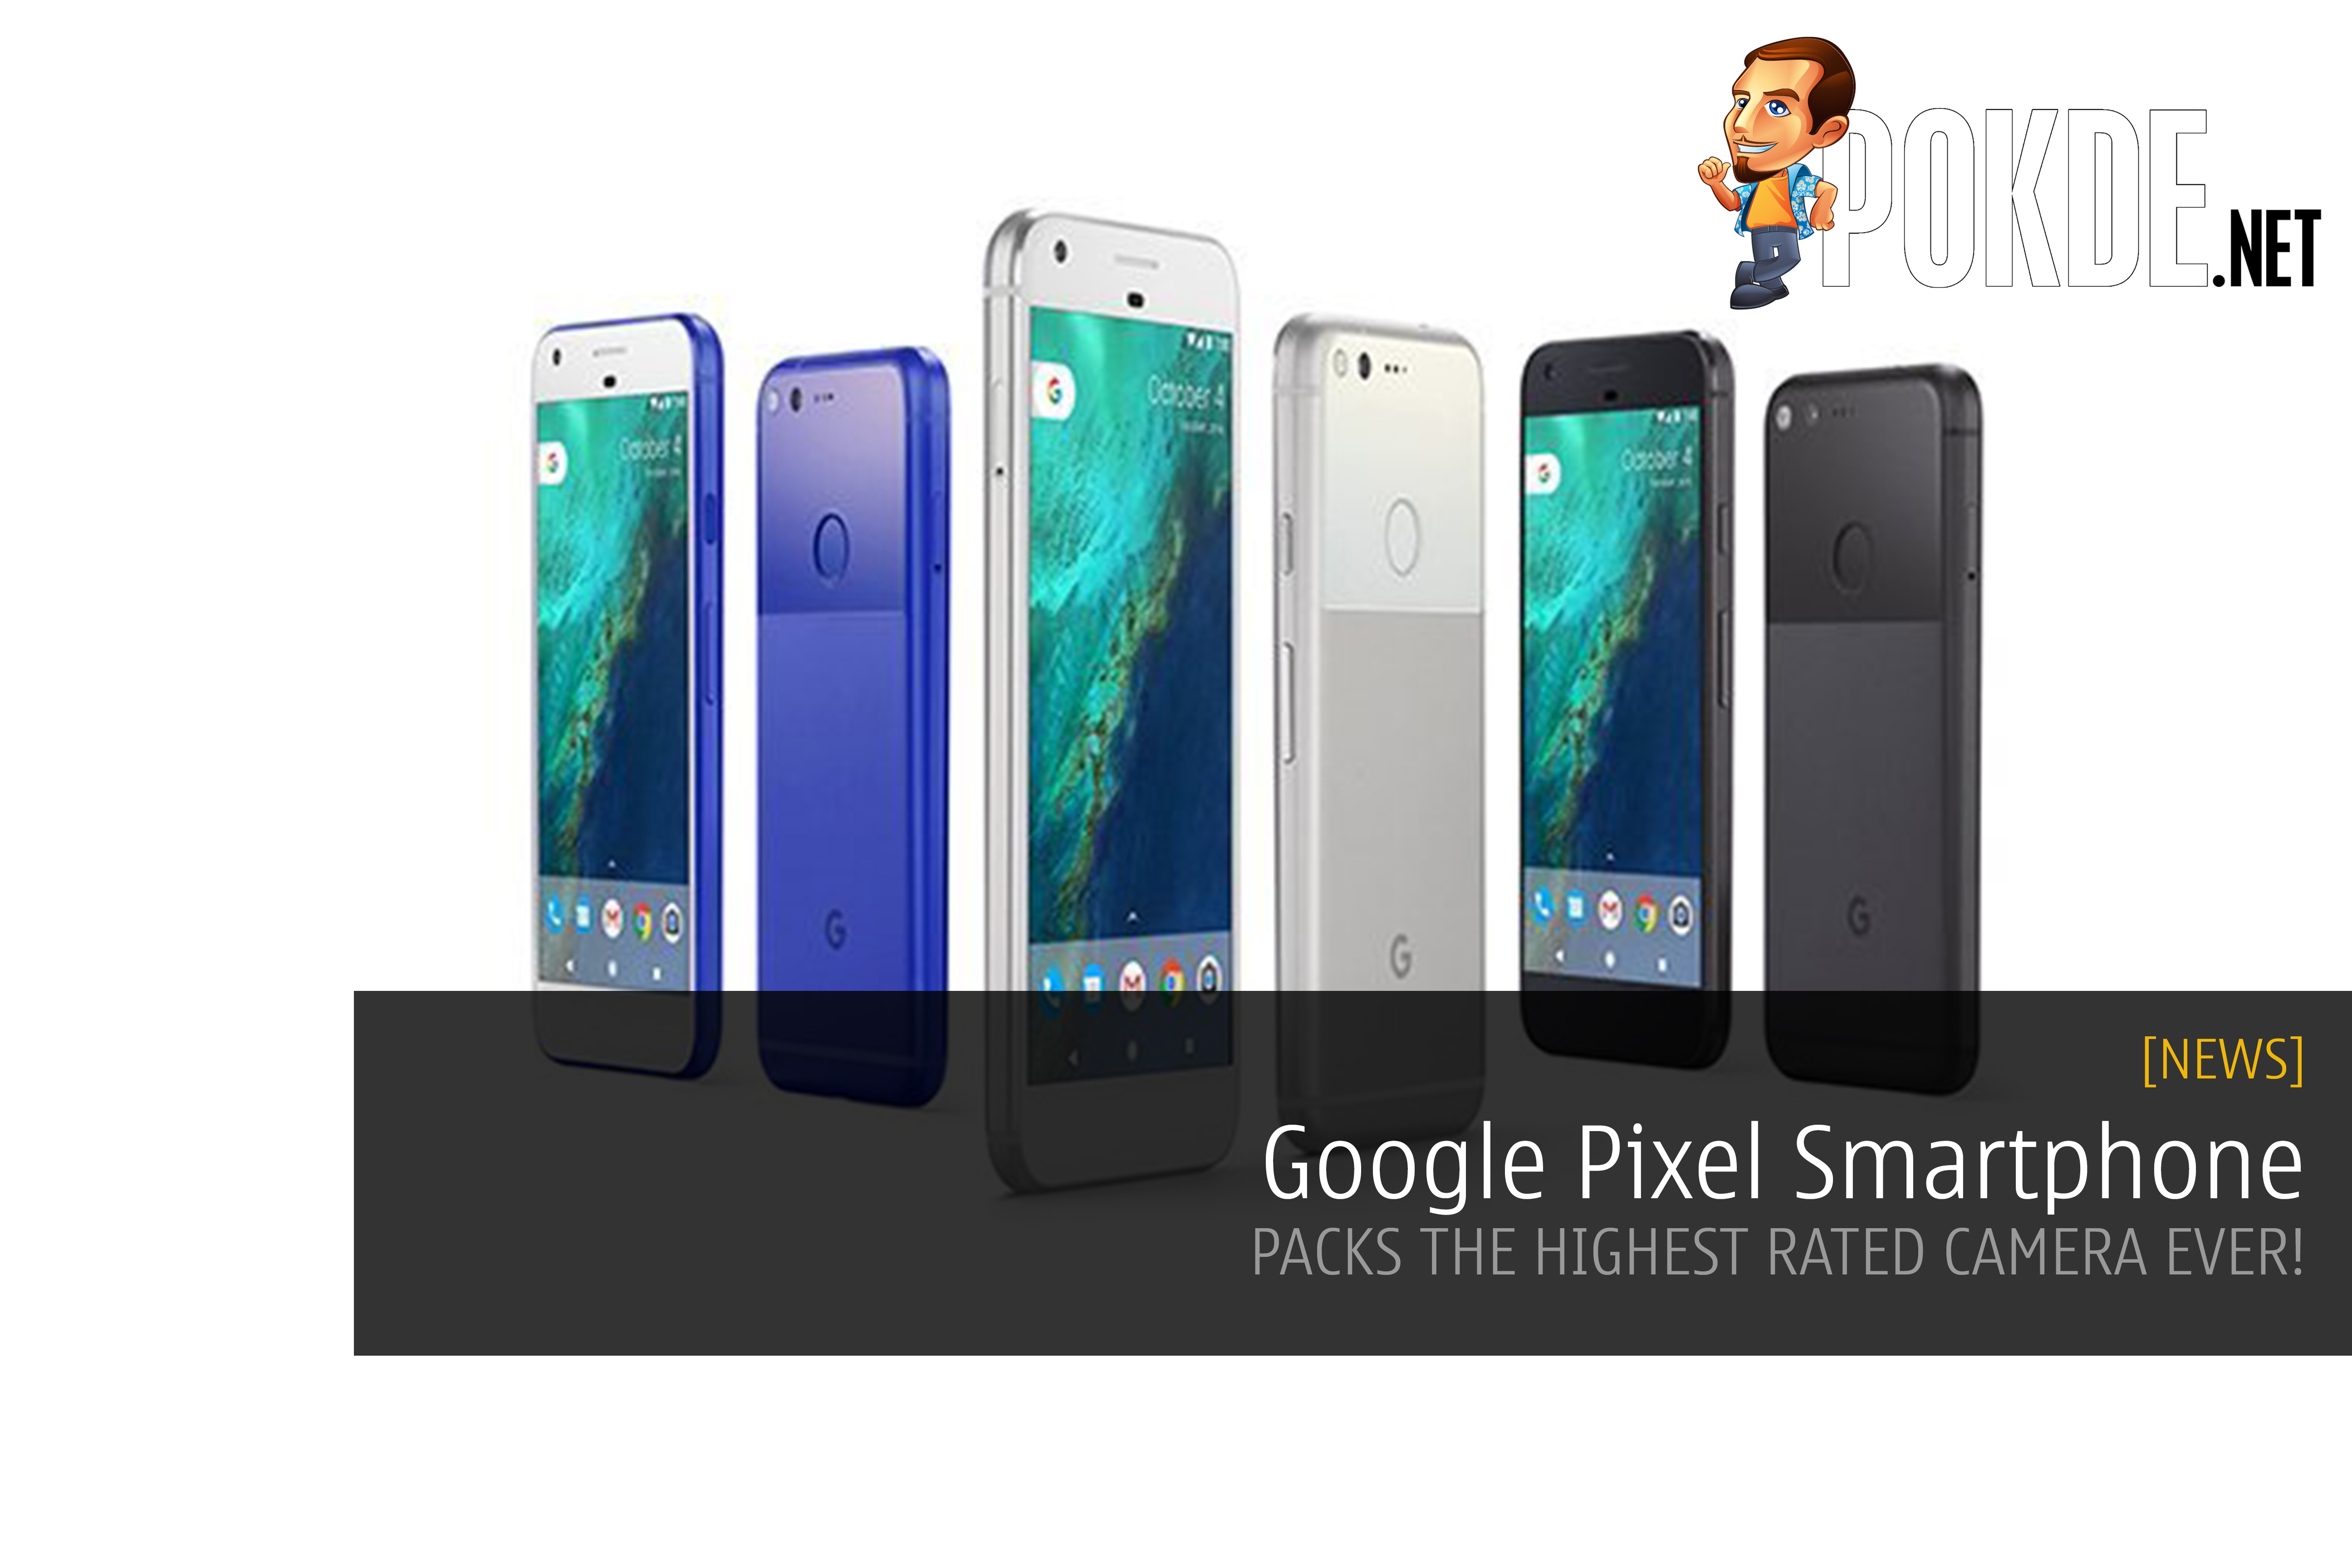 Google Pixel smartphone "made by Google" packs the highest rated camera ever 35